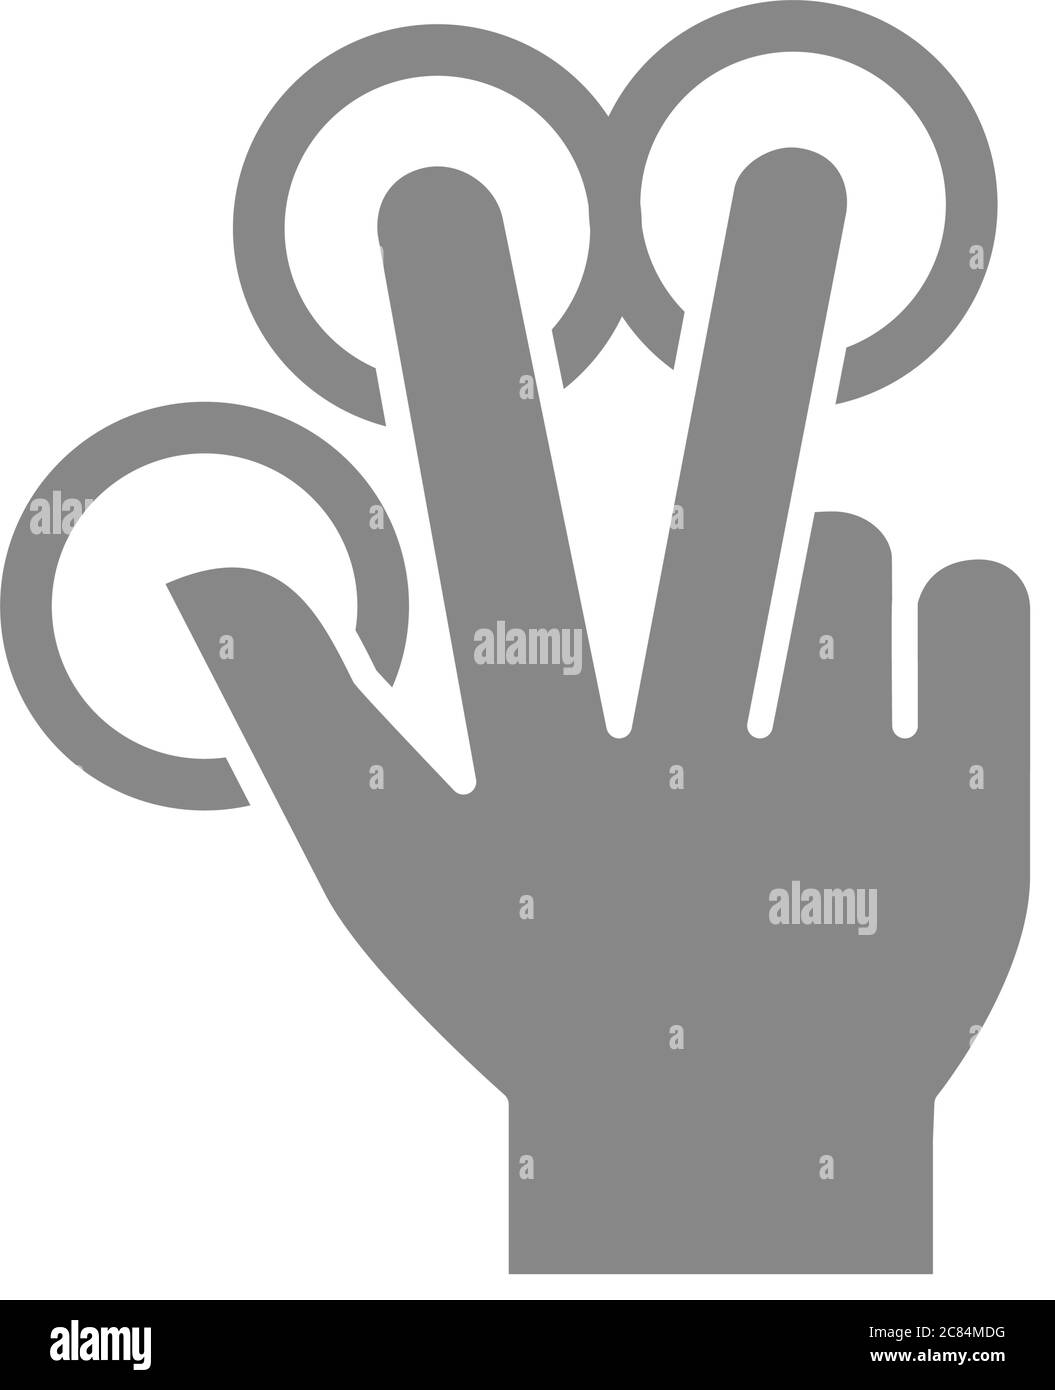 Multitouch for three fingers grey icon. Touch screen finger gesture symbol Stock Vector